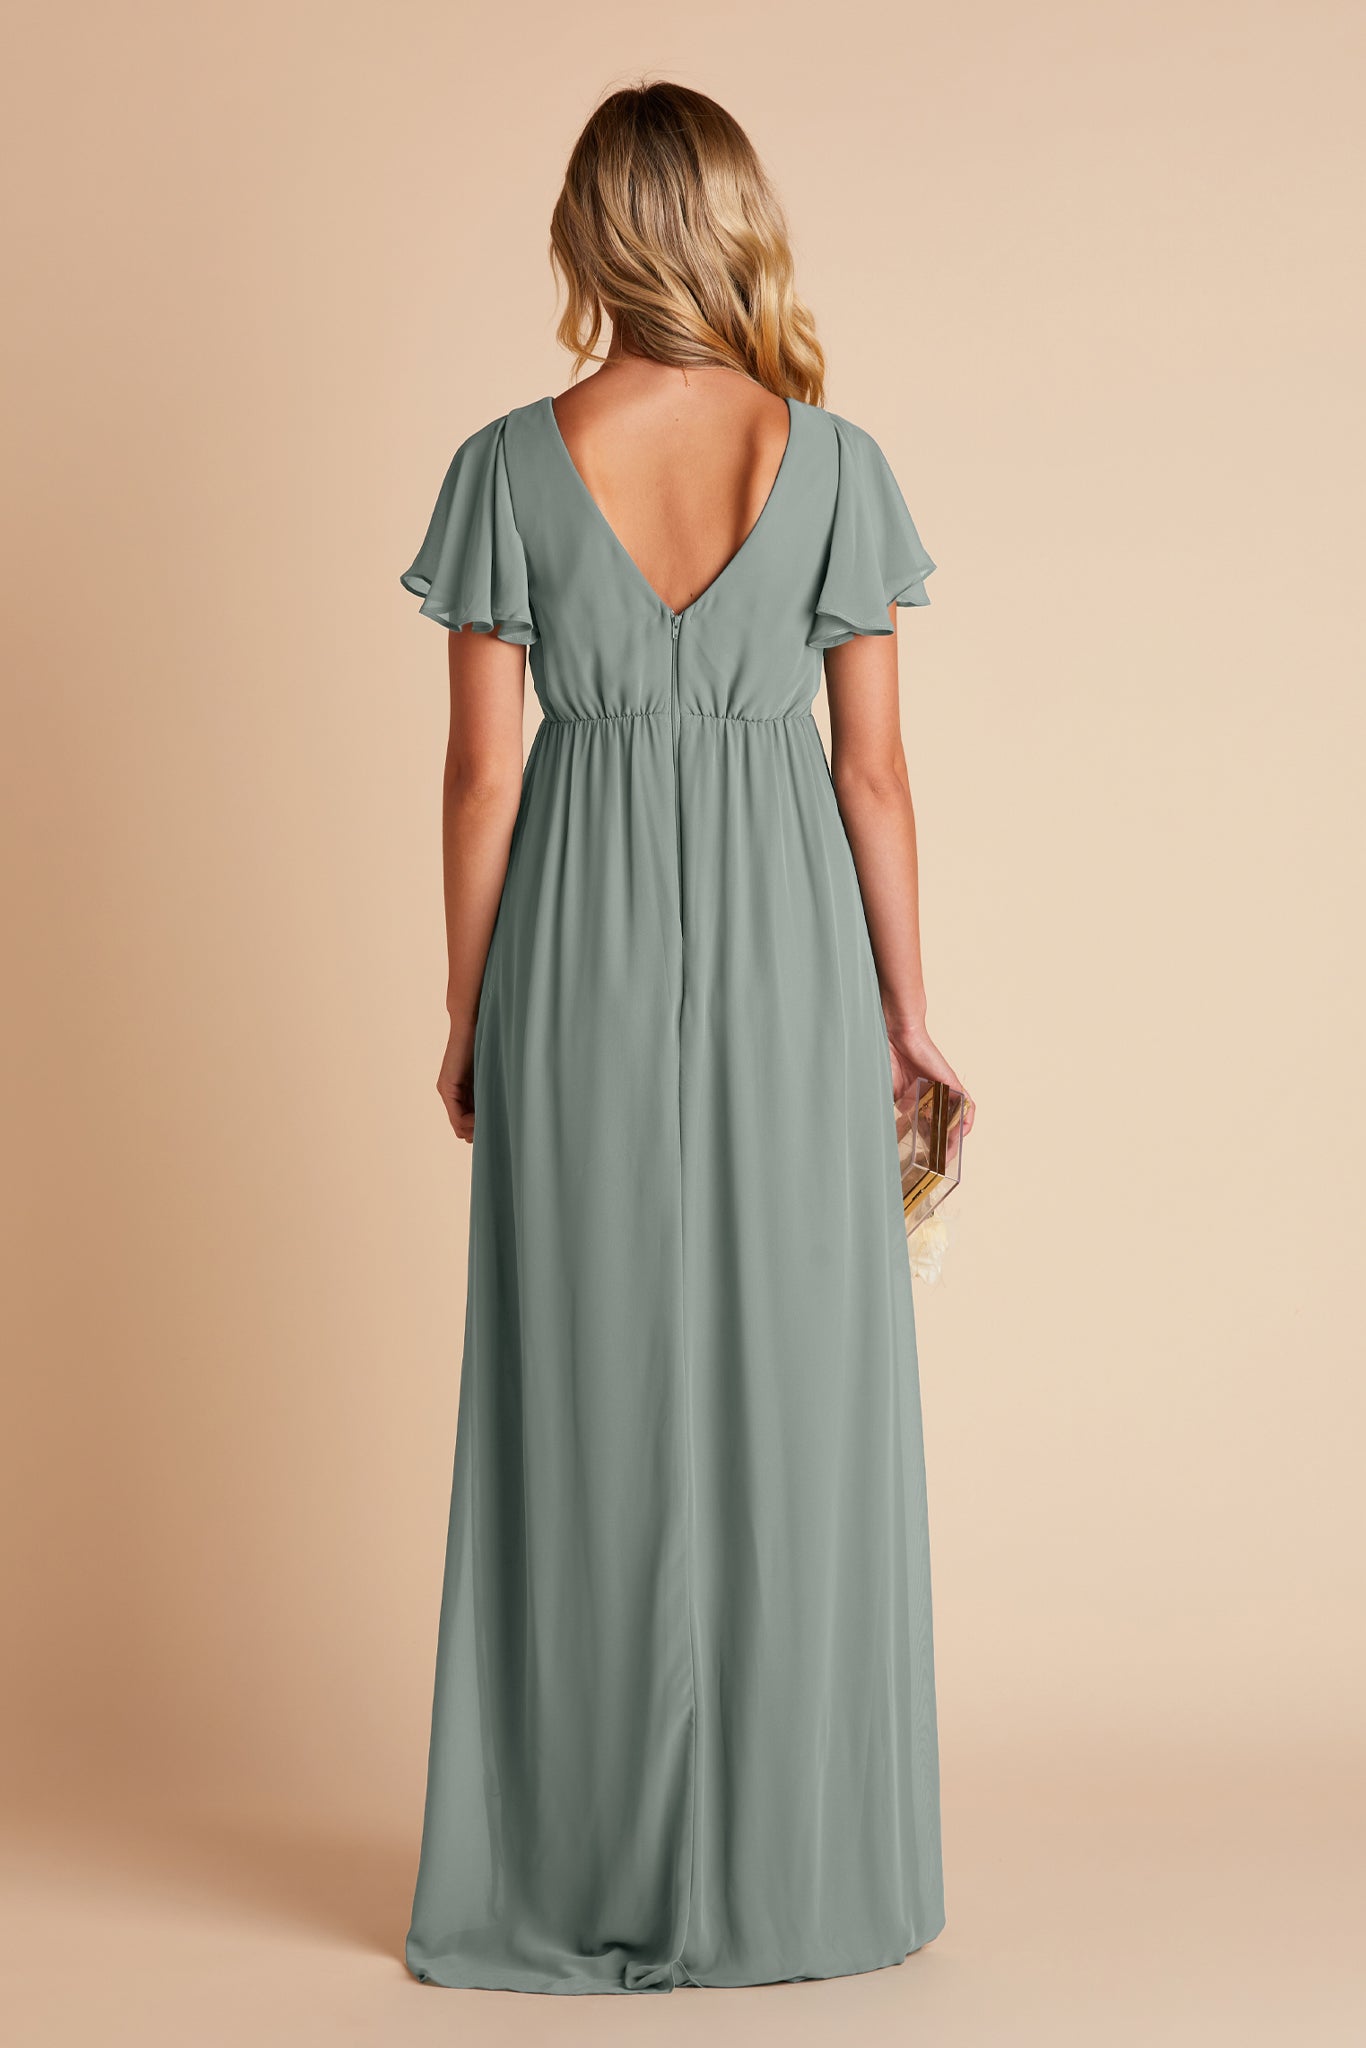 Hannah empire bridesmaid dress with slit in sea glass green chiffon by Birdy Grey, back view